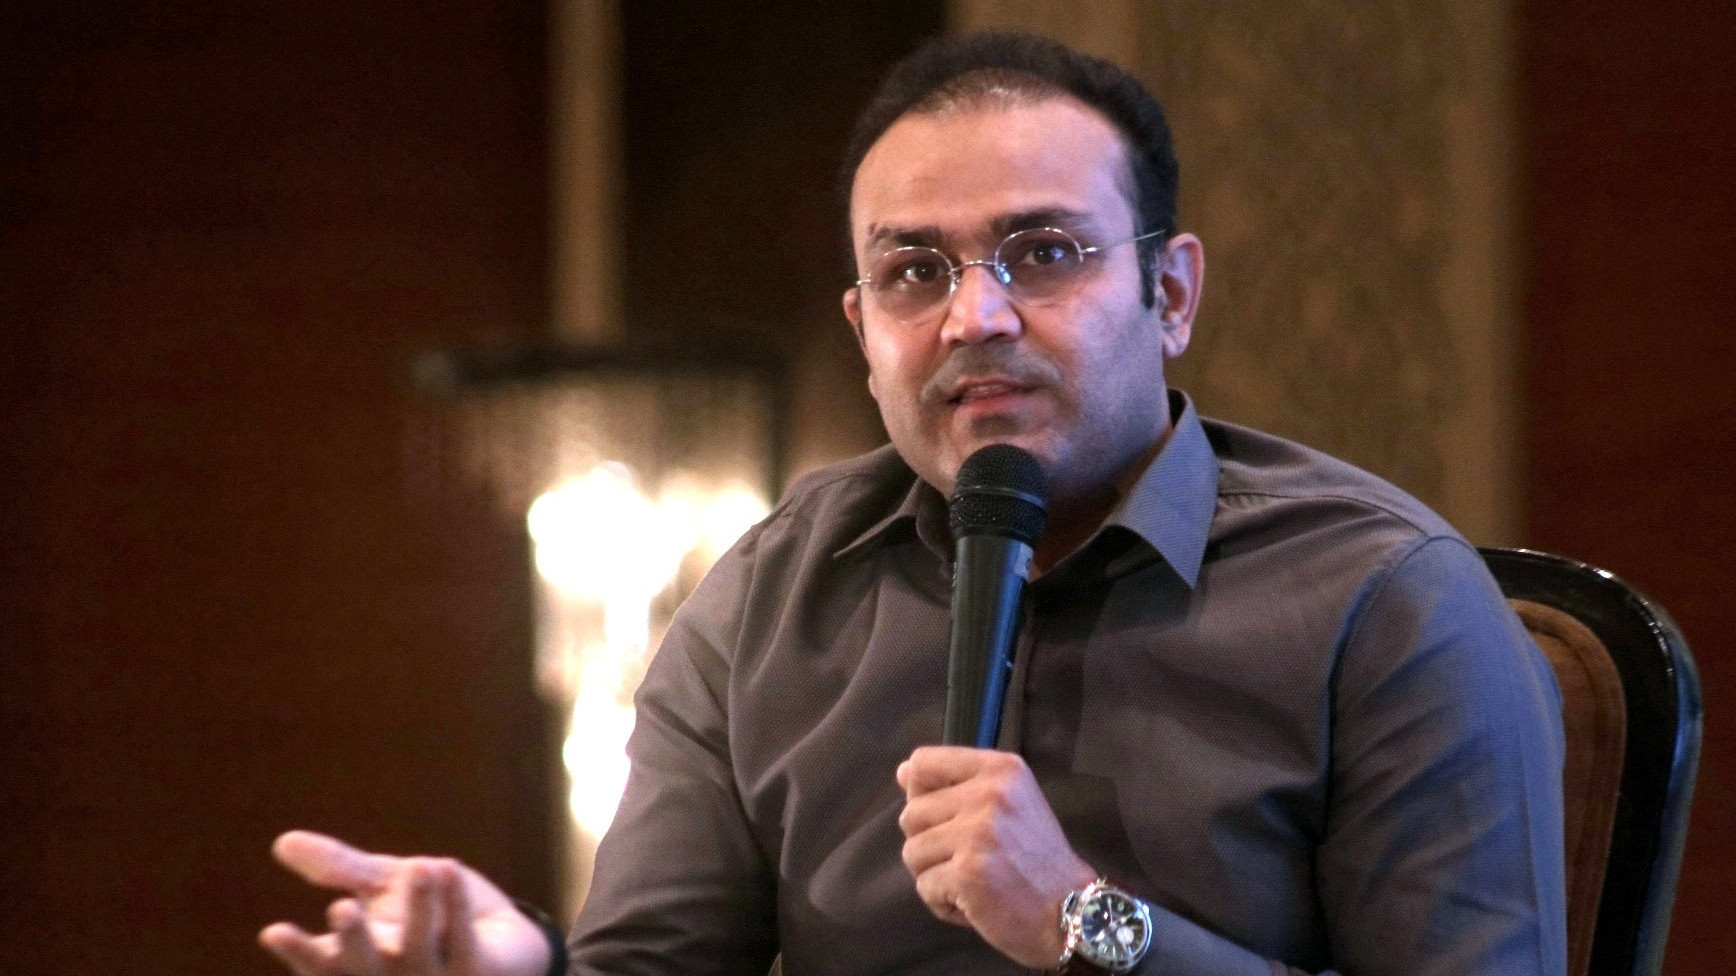 T20 cricket alone isn’t the way forward; all formats can flourish together: Virender Sehwag